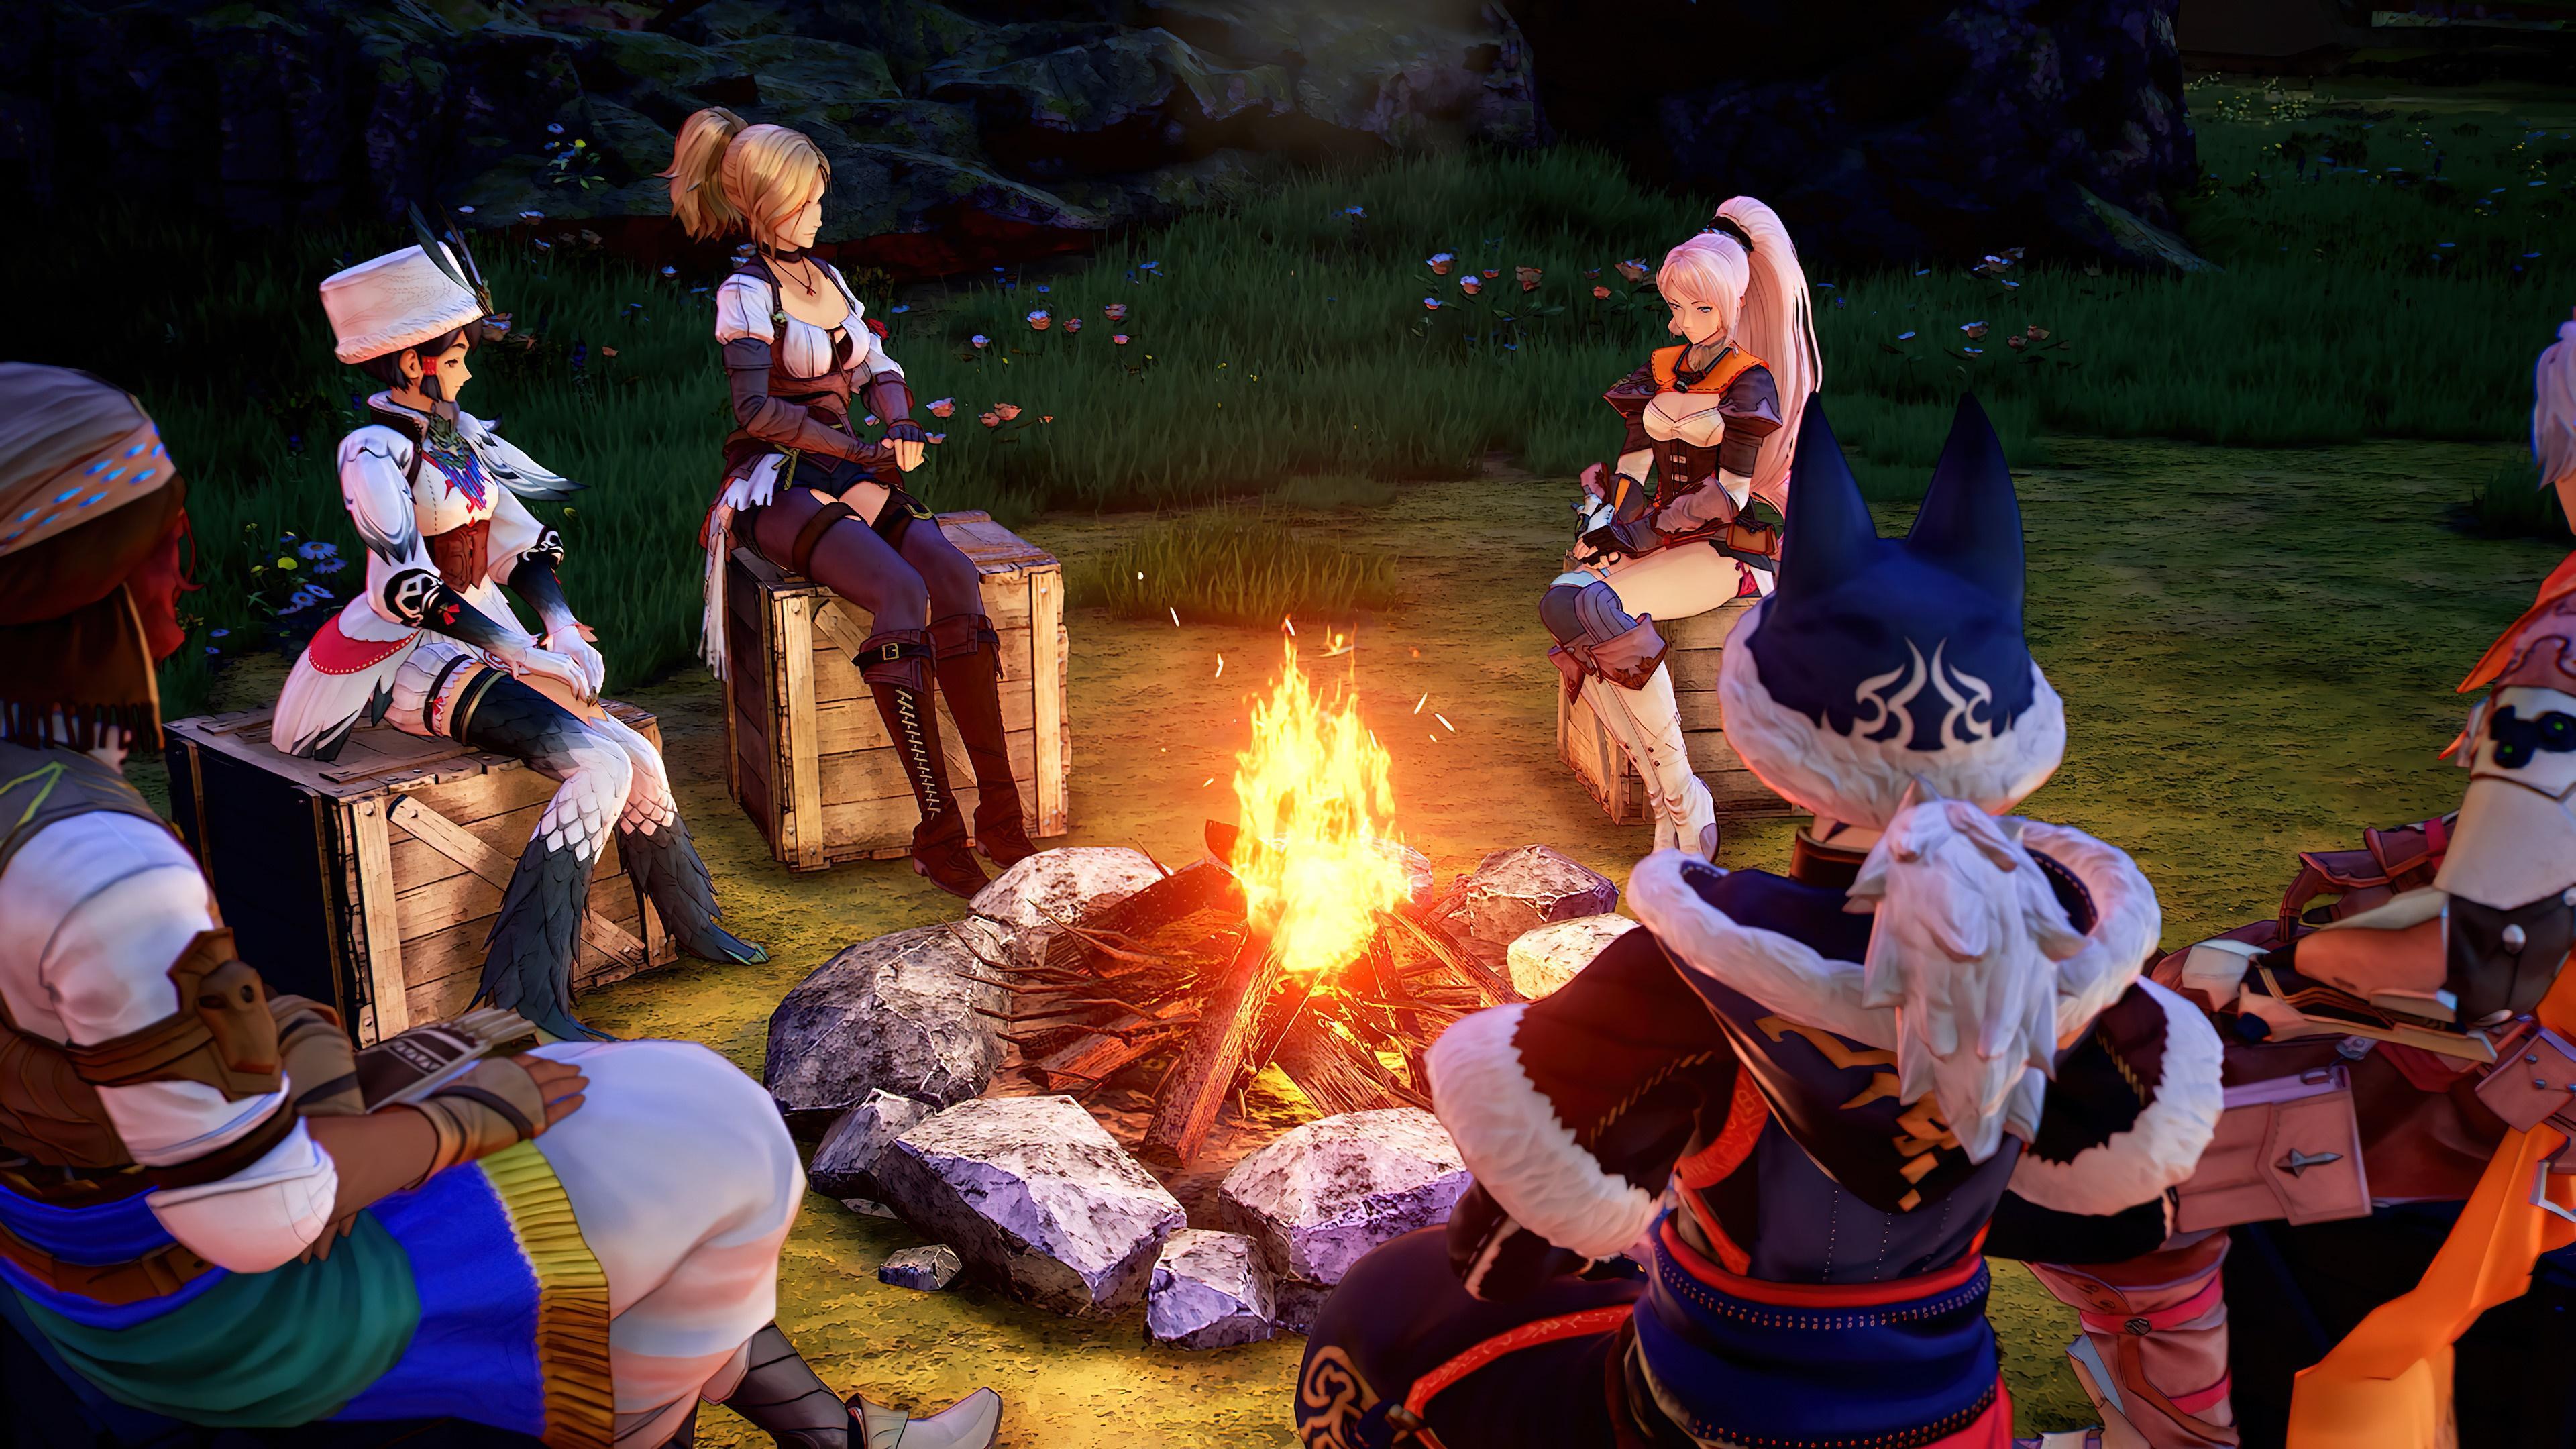 HD wallpaper, Characters, Bonfire, Game, Tales Of Arise, Pc, Campfire, 4K